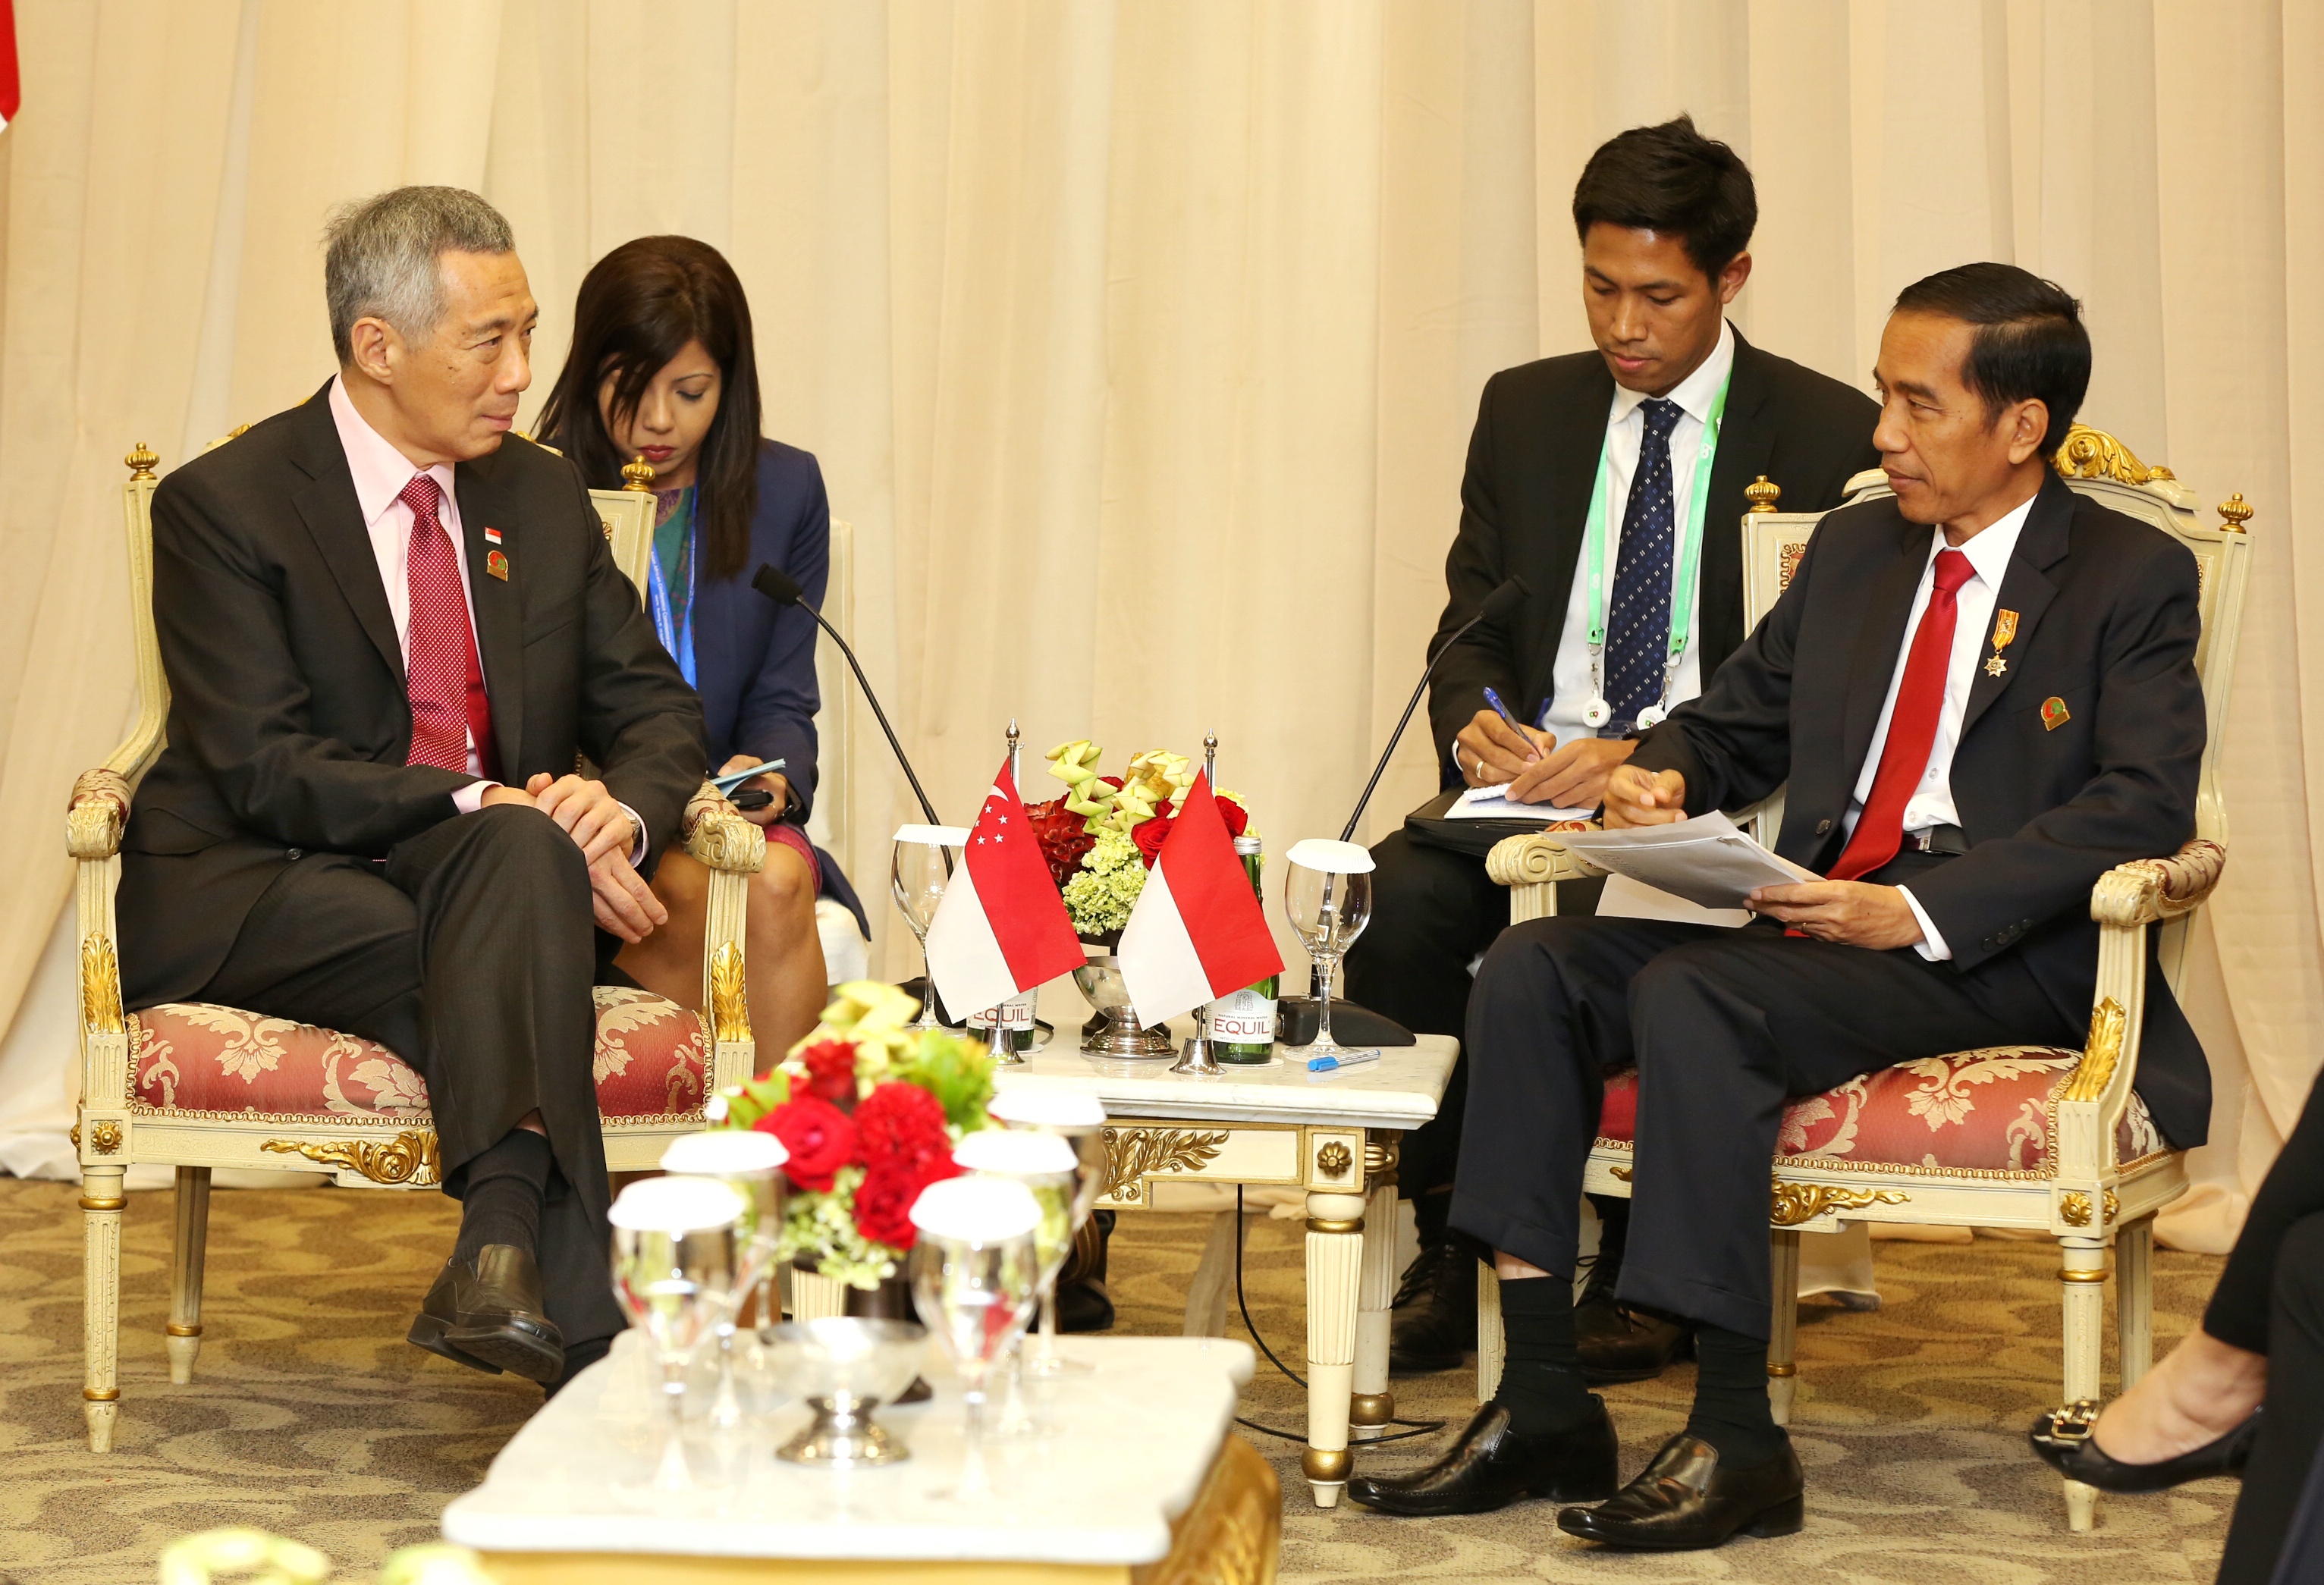 Prime Minister Lee Hsien Loong meeting Indonesian President Joko Widodo at the 2nd Asian-African Summit - Apr 2015 (MCI Photo by Terence Tan)